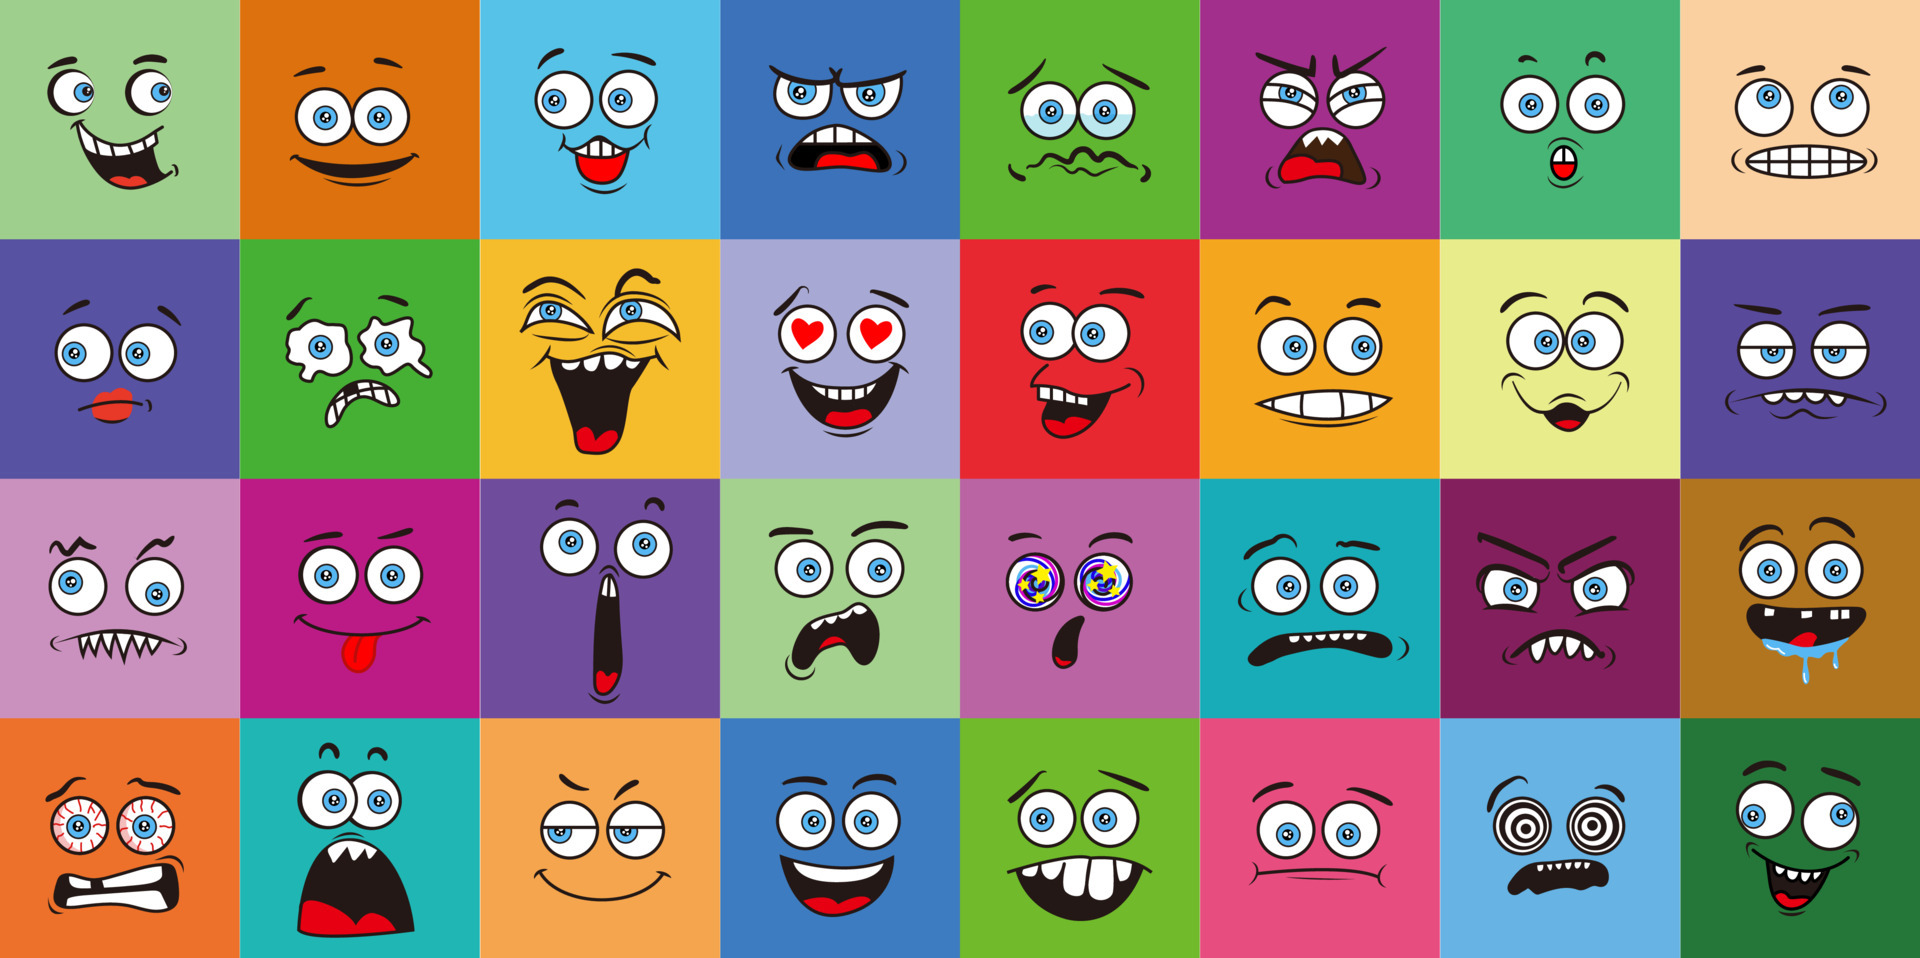 Premium Vector  Shocked face doodle scared expression with open mouth